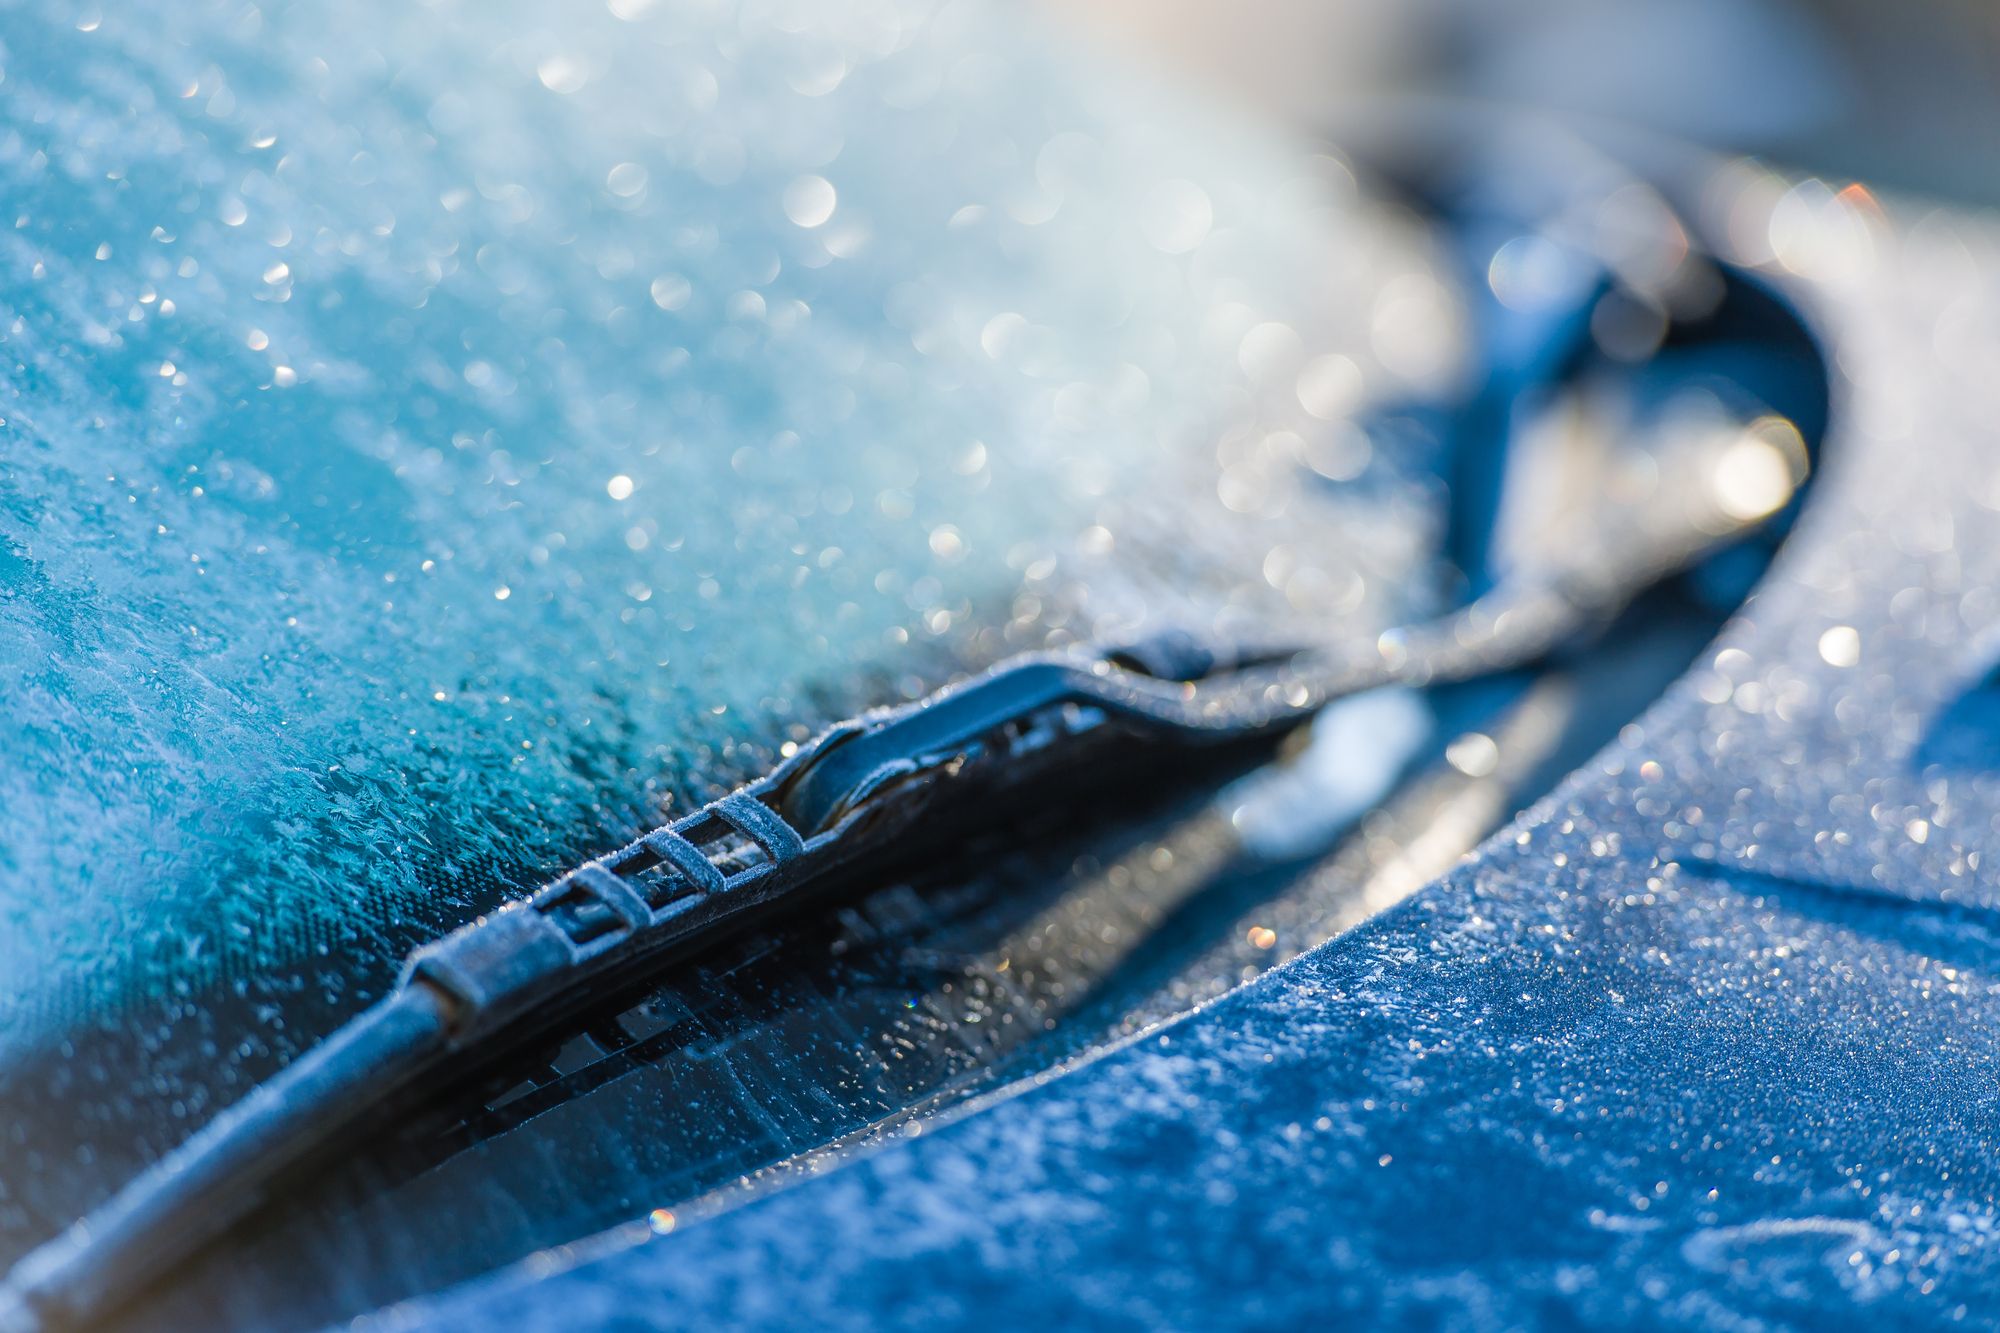 Best to de-ice your windshield? You need patience, but not vinegar